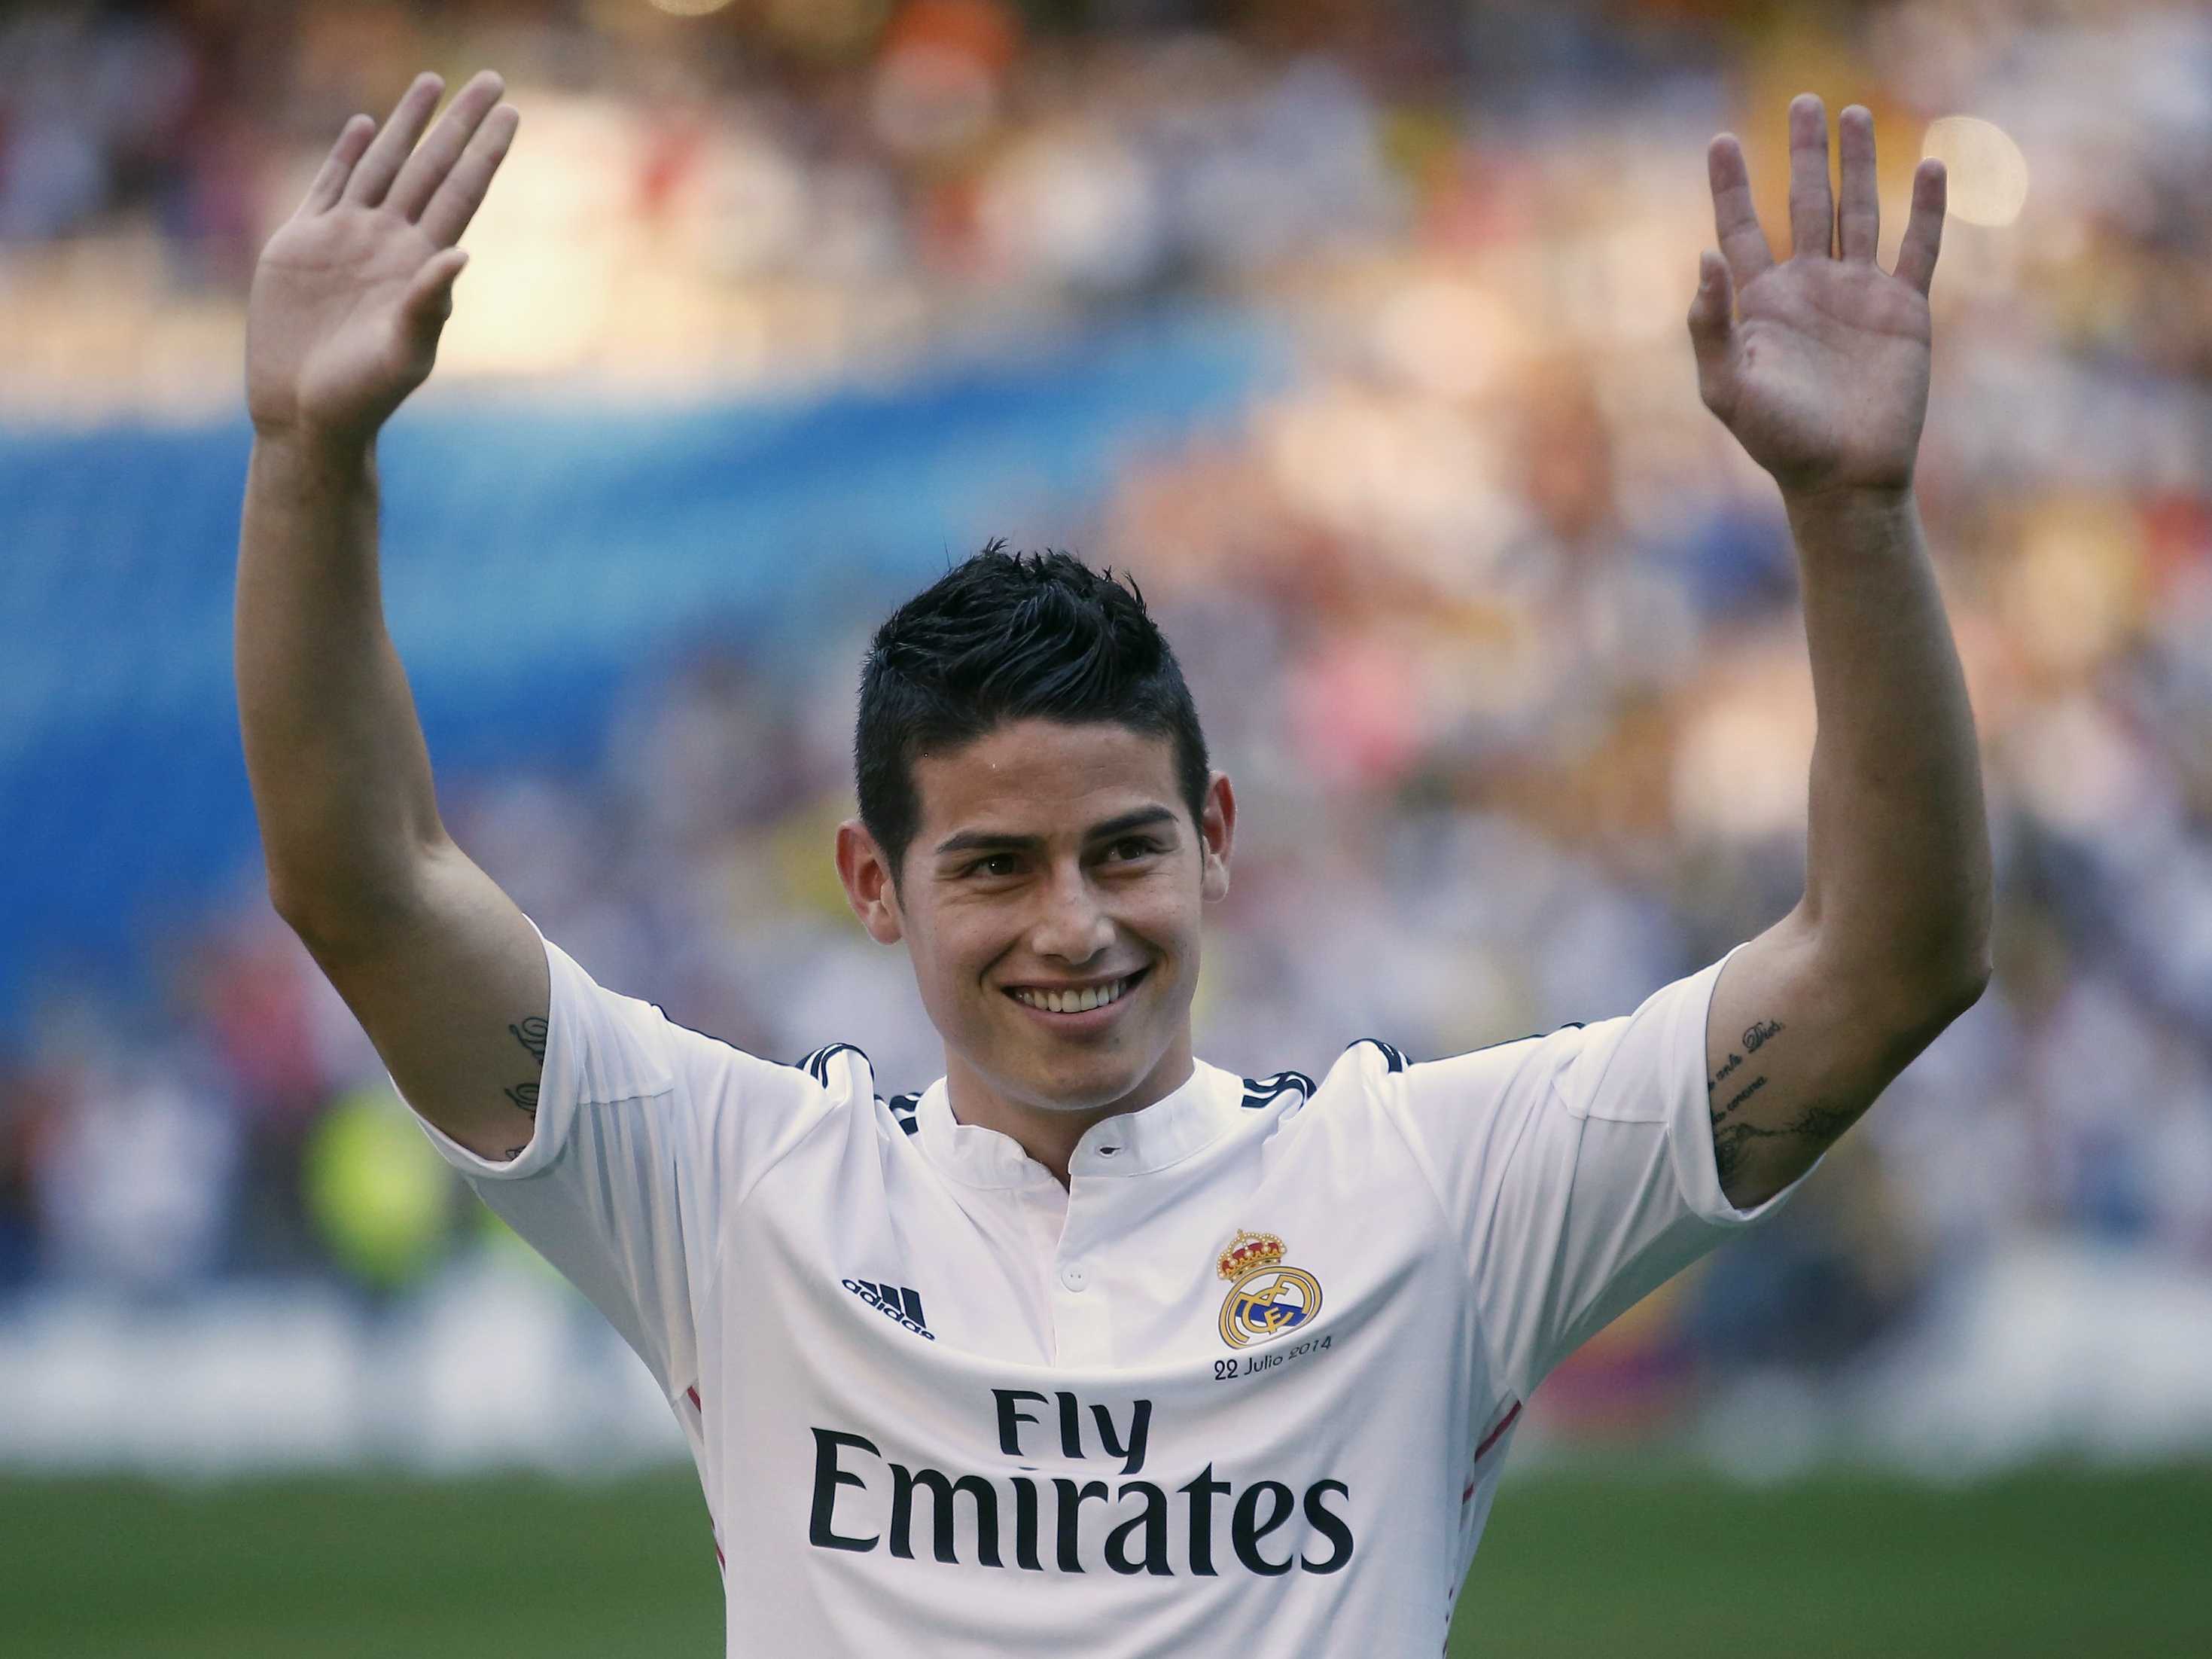 James Rodriguez - Fly Emirates , HD Wallpaper & Backgrounds